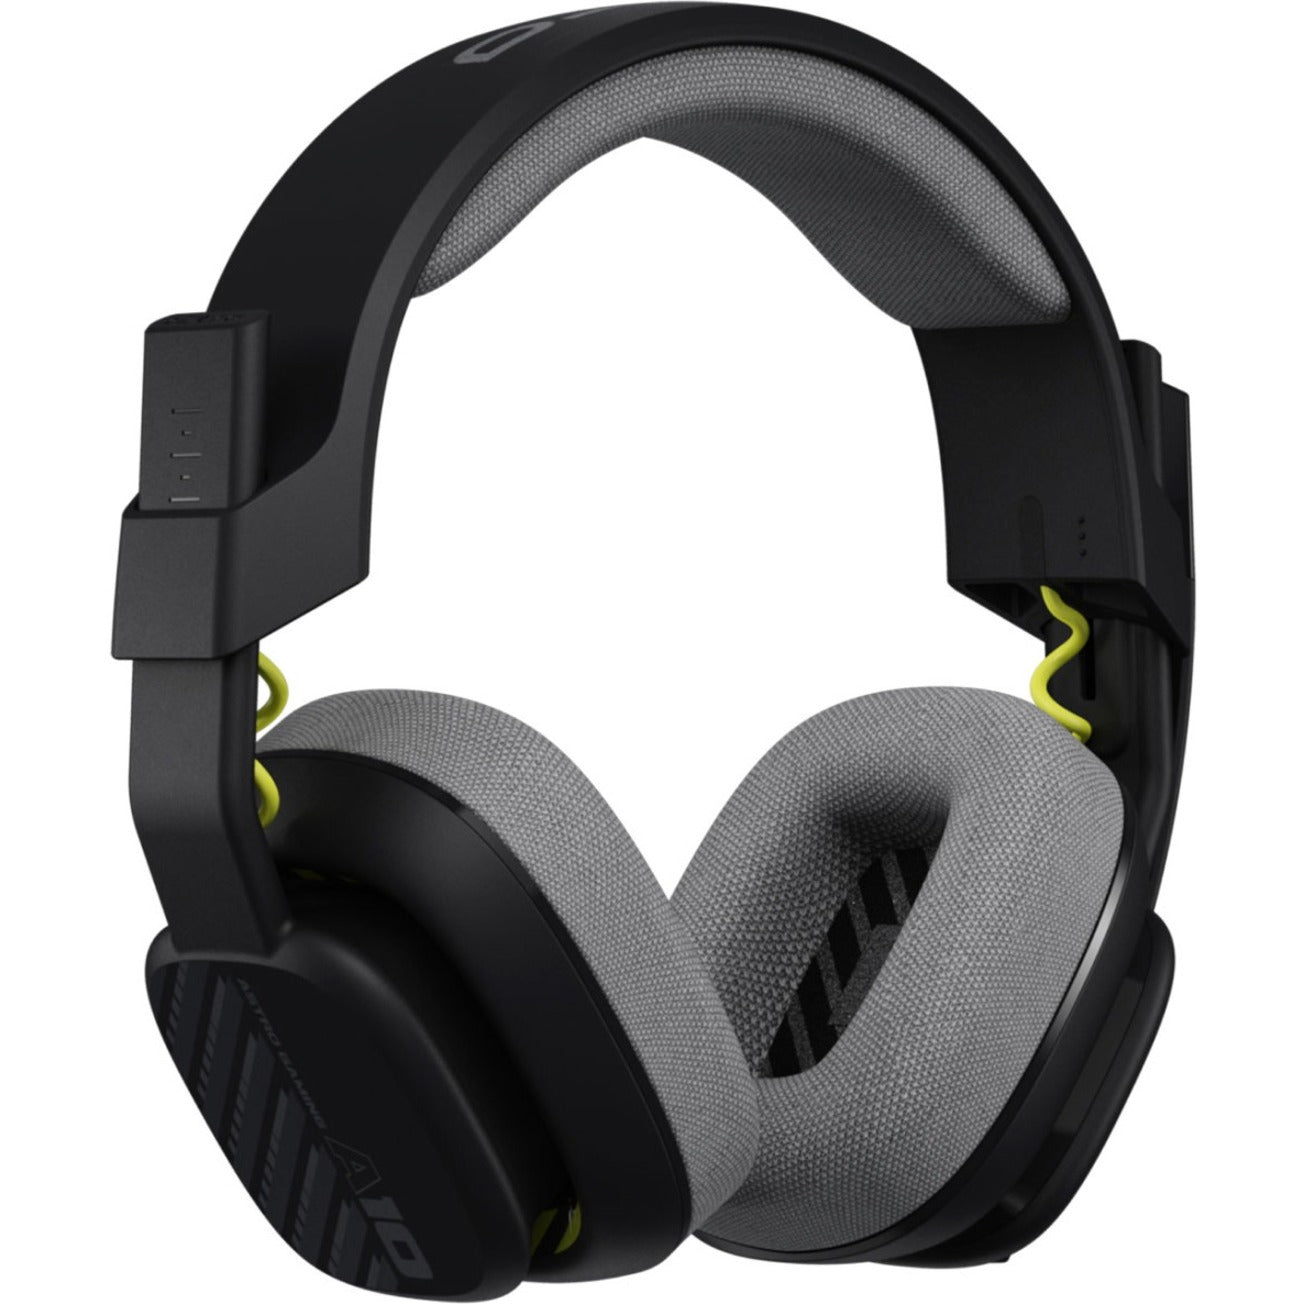 Astro 939-002055 A10 Headset, Lightweight Gaming Headset with Flip to Mute Microphone